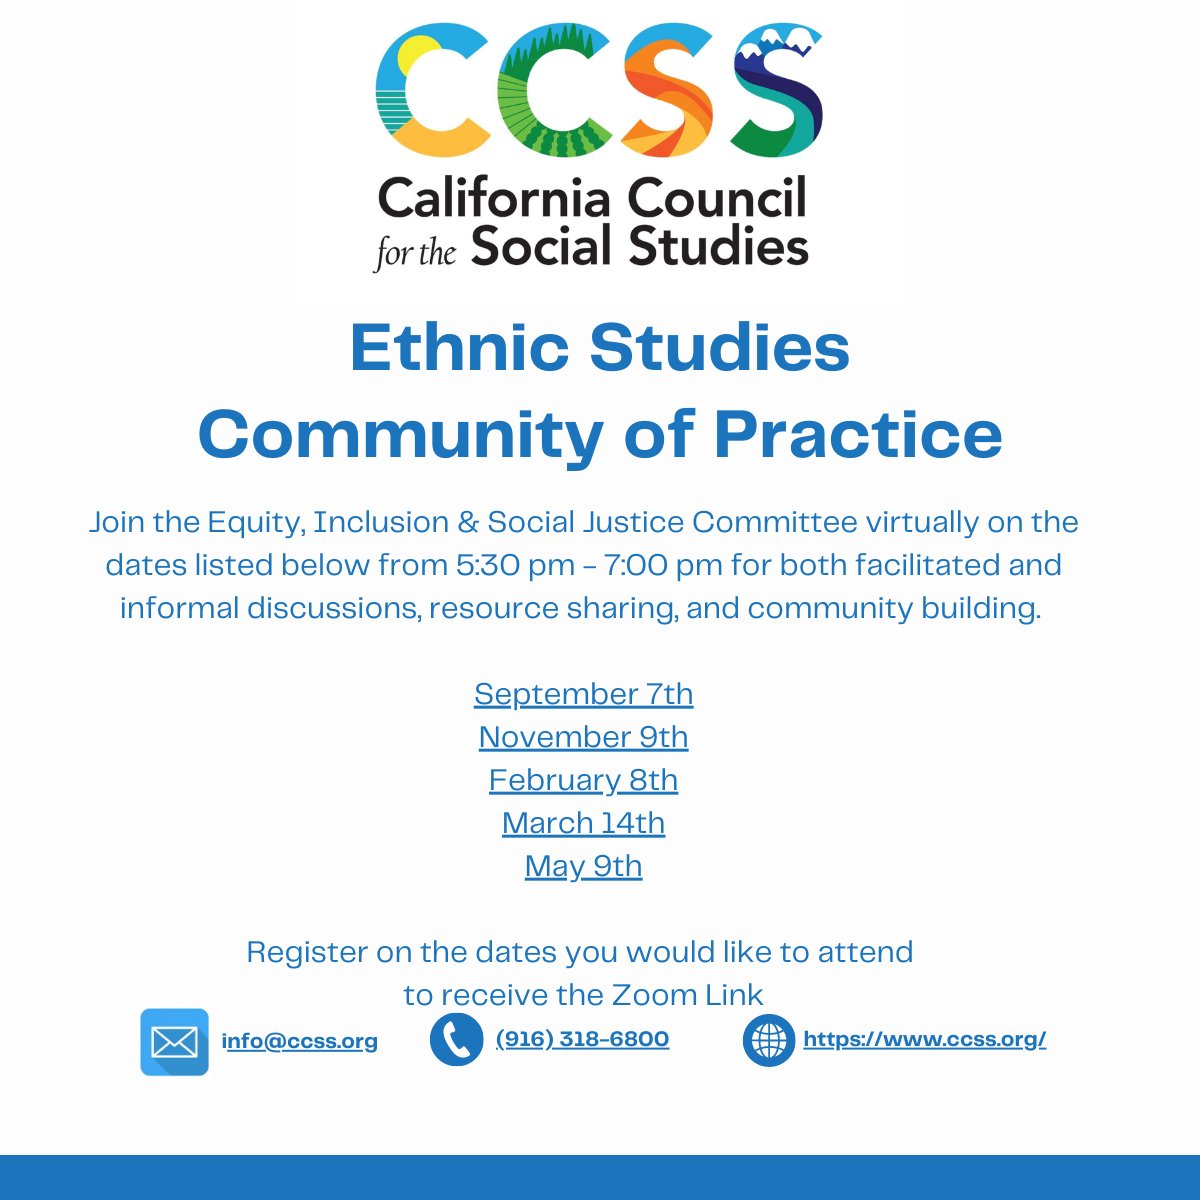 Join our next #CCSS Ethnic Studies Community of Practice on April 18th at 5:30p PST (replacing the event from March). Learn and share about your districts implementation of Ethnic Studies. #sschat #caedchat #ethnicstudies Register at casocialstudies.org/event-5376498